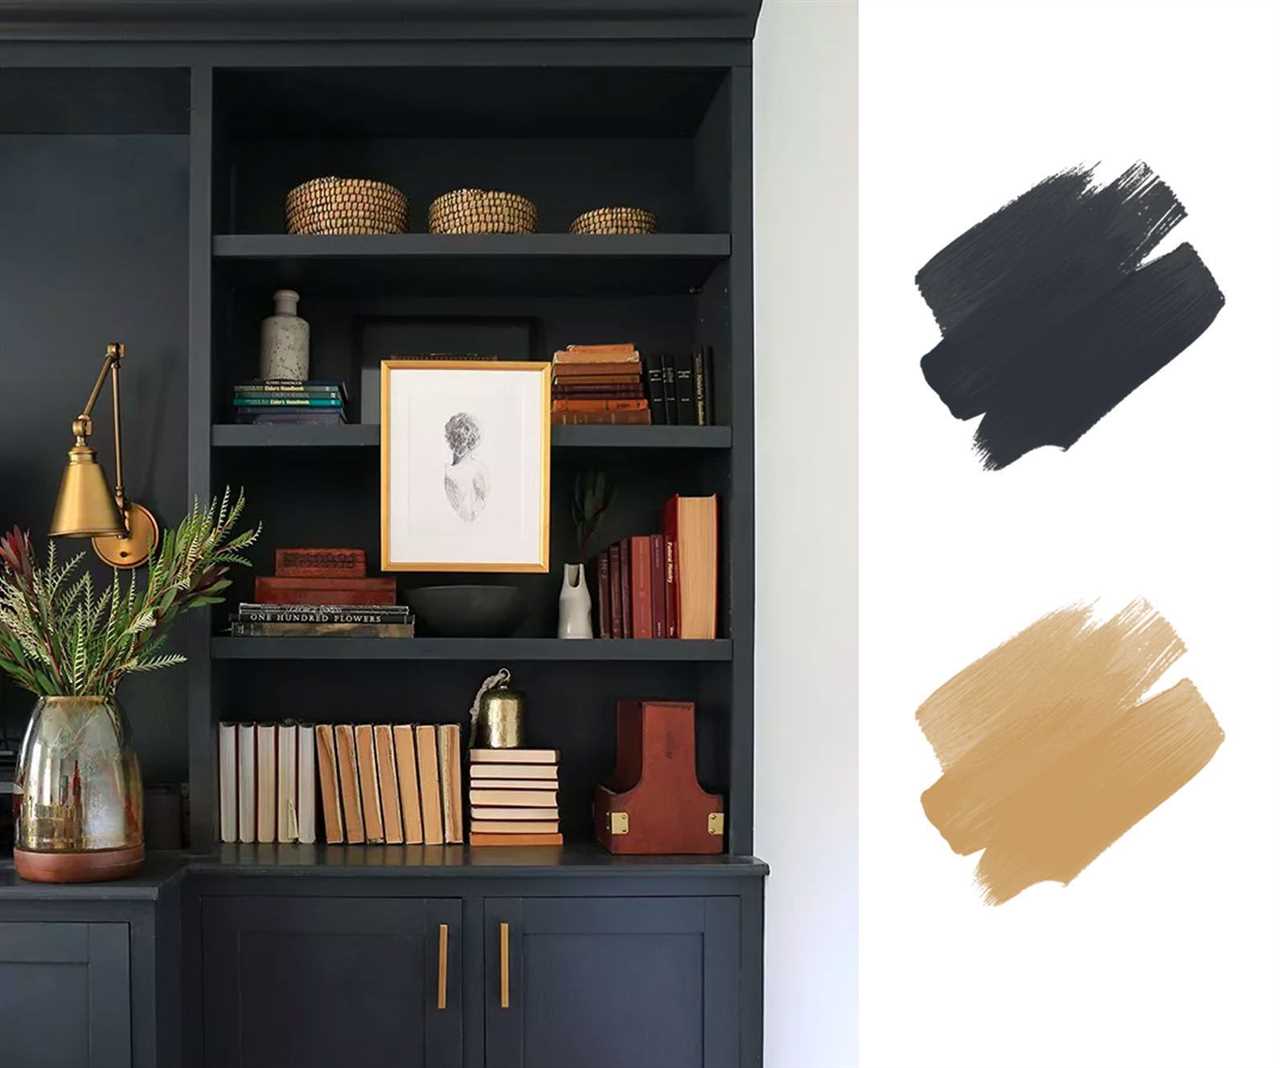 How to Use Orange Brown: